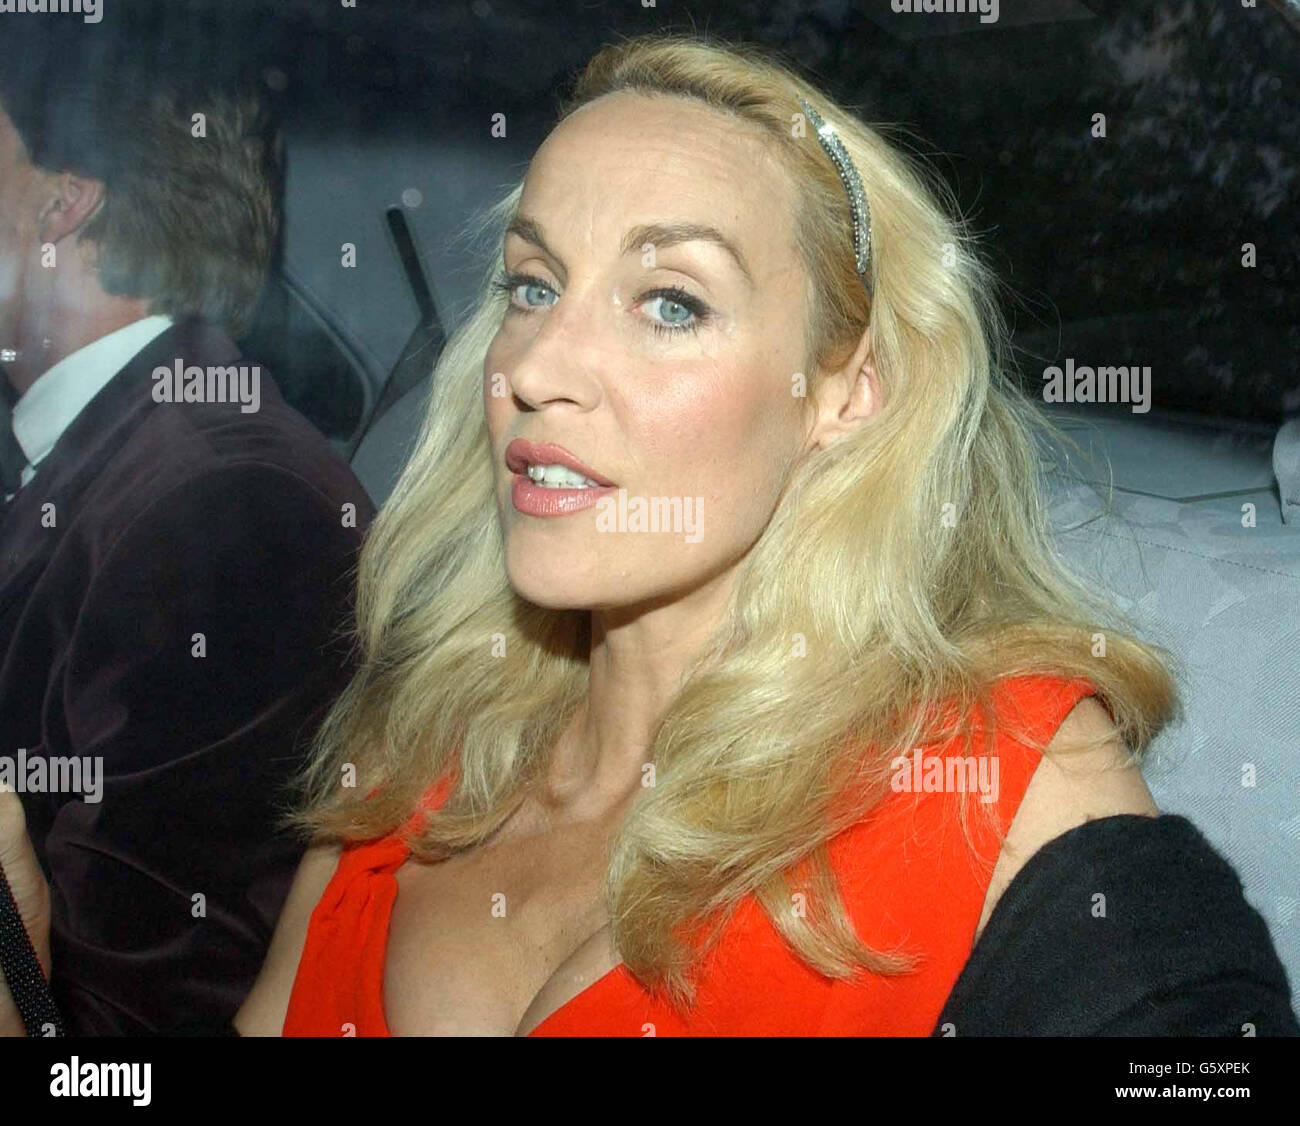 Jerry Hall arrives for Sir Elton John's White Tie and Tiara Ball at 'Woodside', his Berkshire mansion. All funds from the exclusive private party go to the Elton John AIDS Foundation. Stock Photo